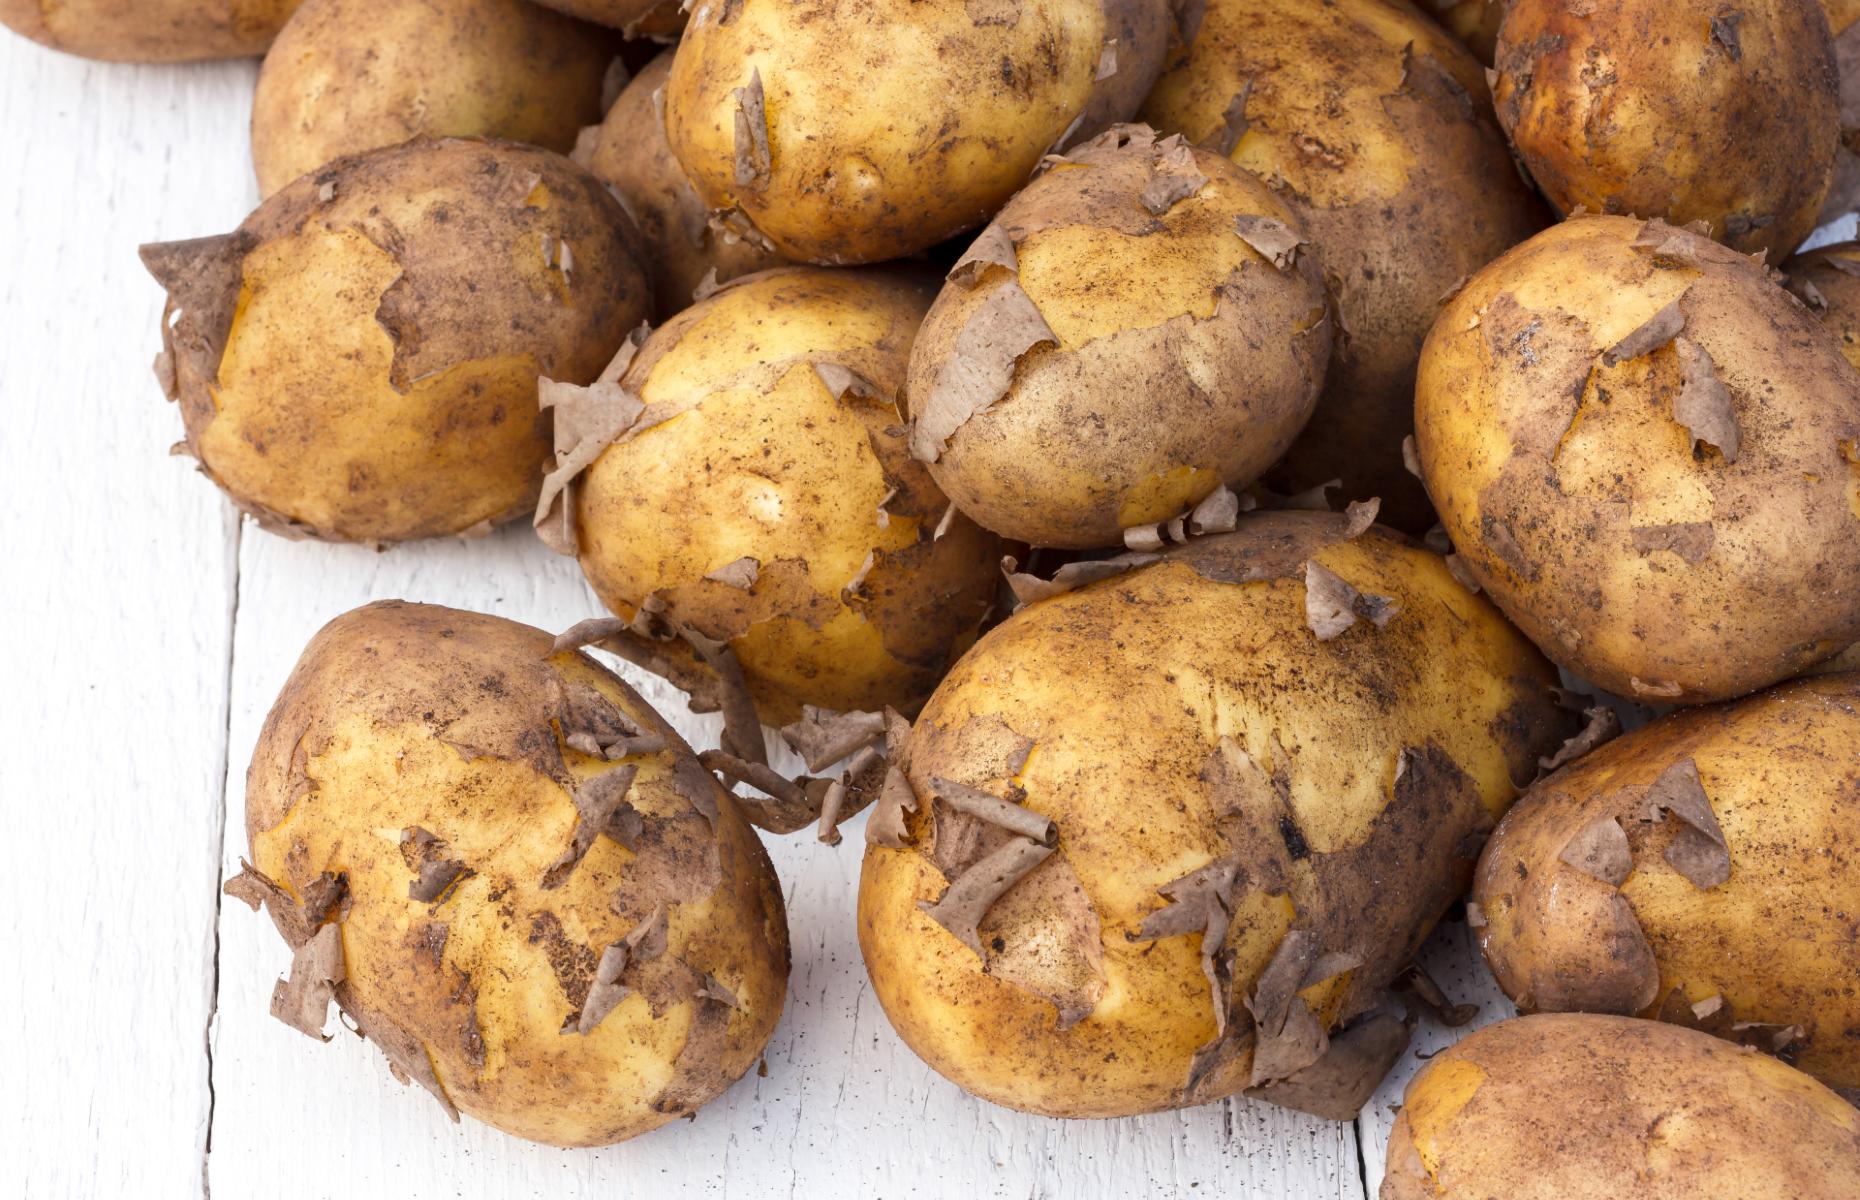 Jersey Royals in their skins [image: Moving Moment/Shutterstock]